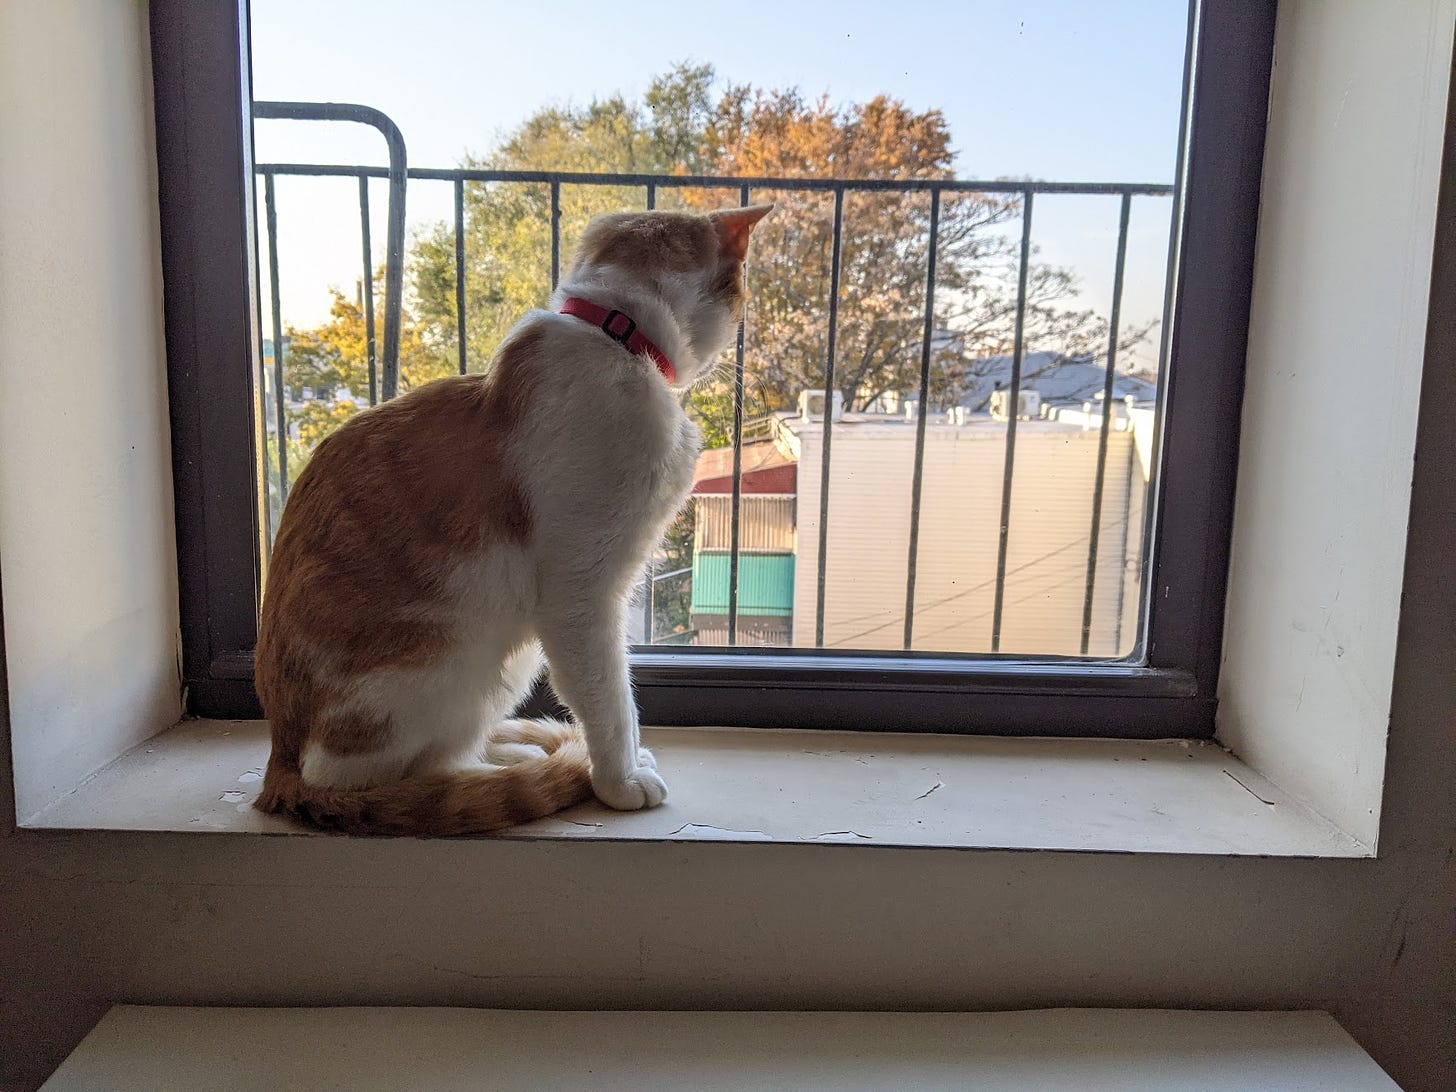 A red and white cat looks out the window of an apartment, with trees and other houses seen on the outside